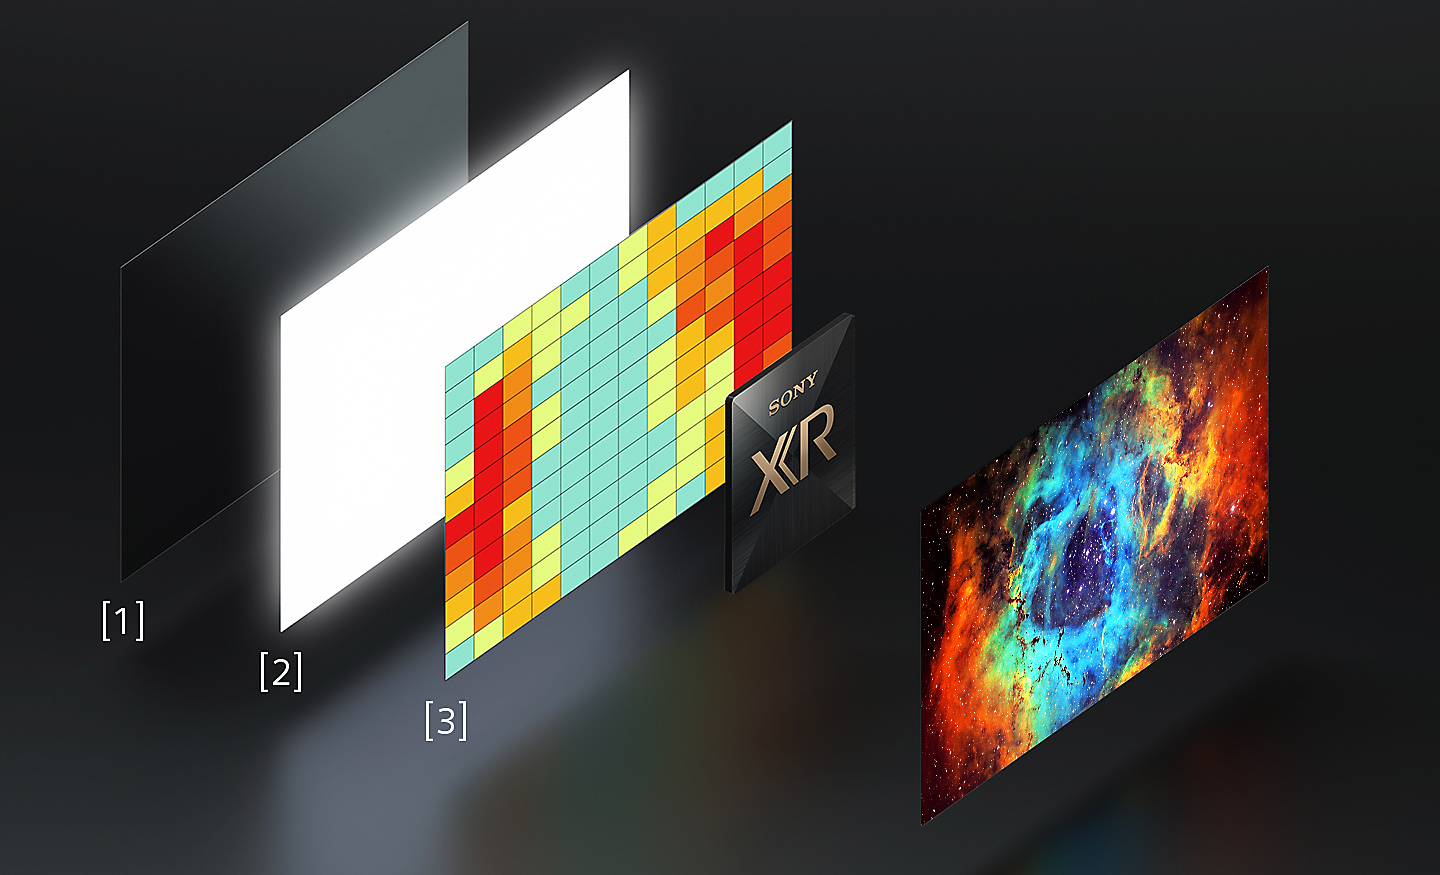 Graphic showing angled images of the heat diffusion sheet, high luminance panel and temperature distribution mapping on the left, and an angled image of a BRAVIA screen full of colour on the right